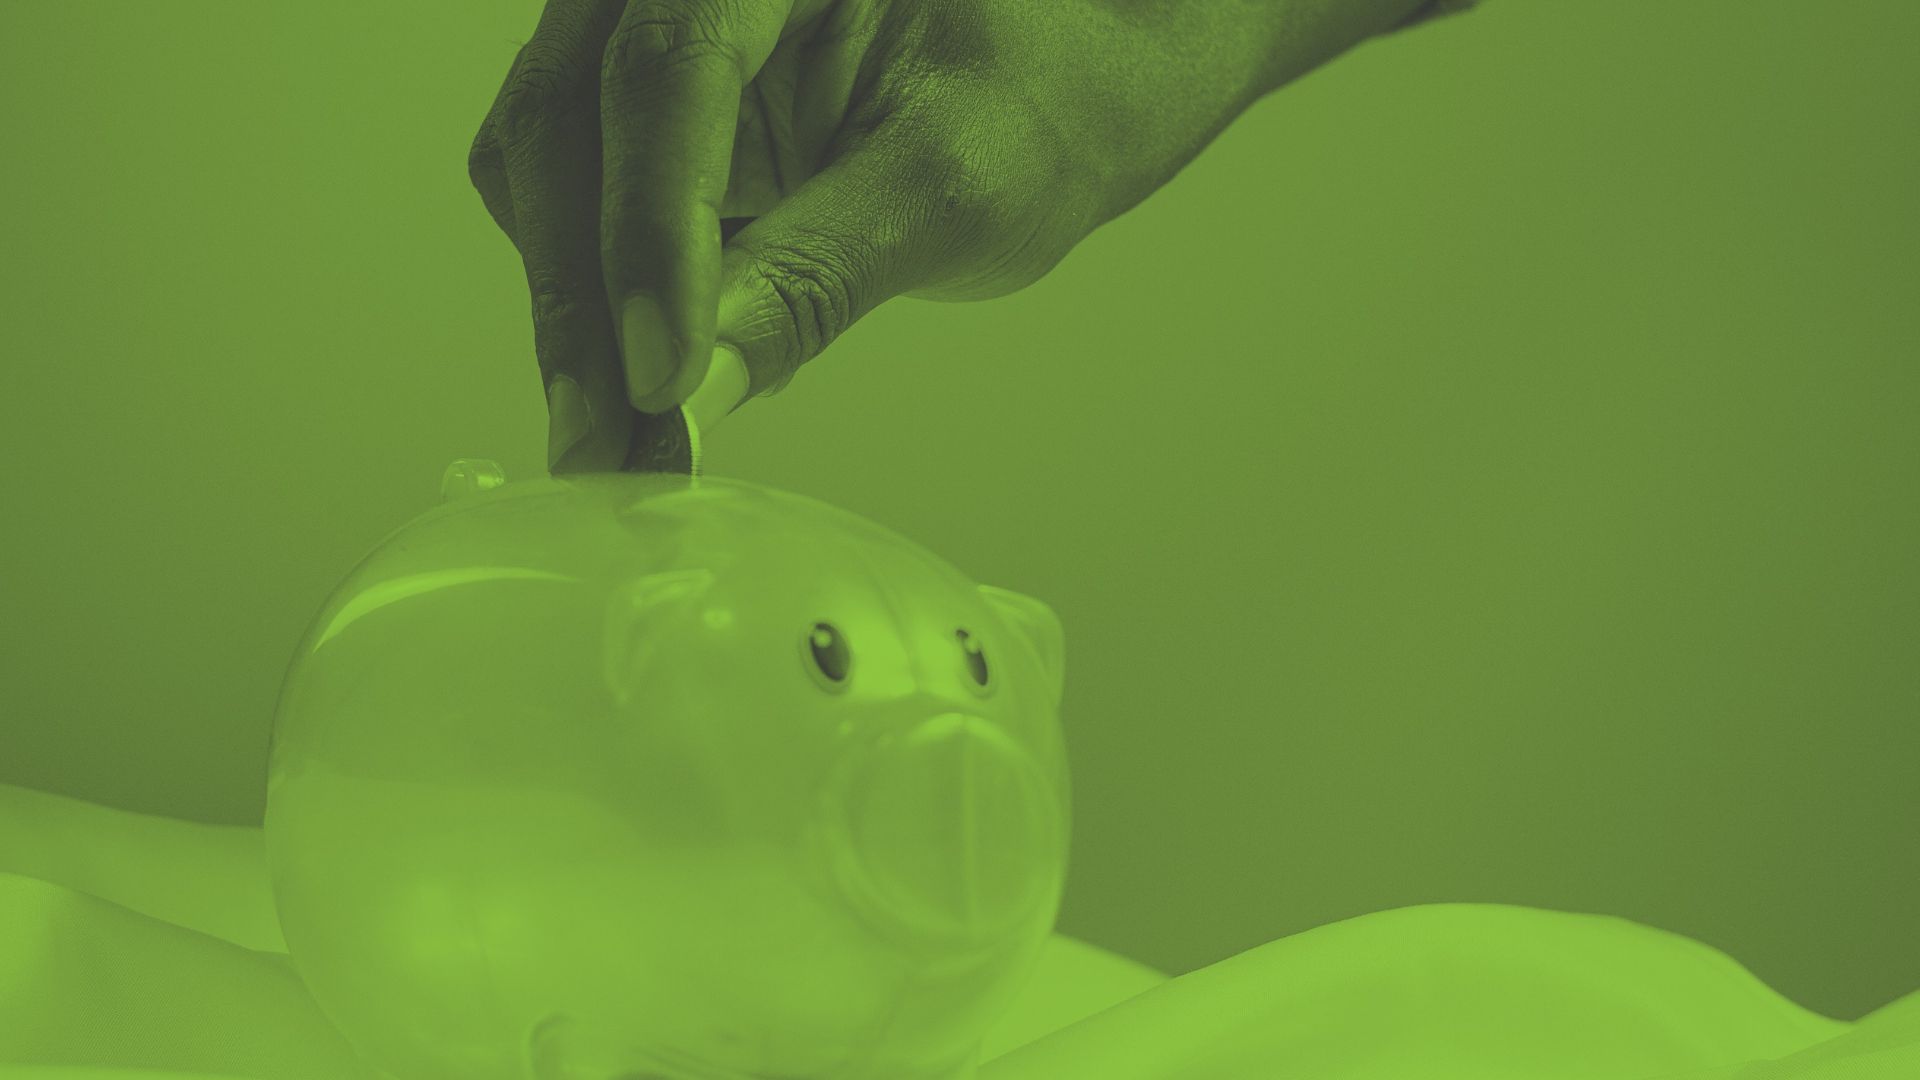 An image of a child putting money into a piggy bank - provision of programmes to improve financial literacy and education